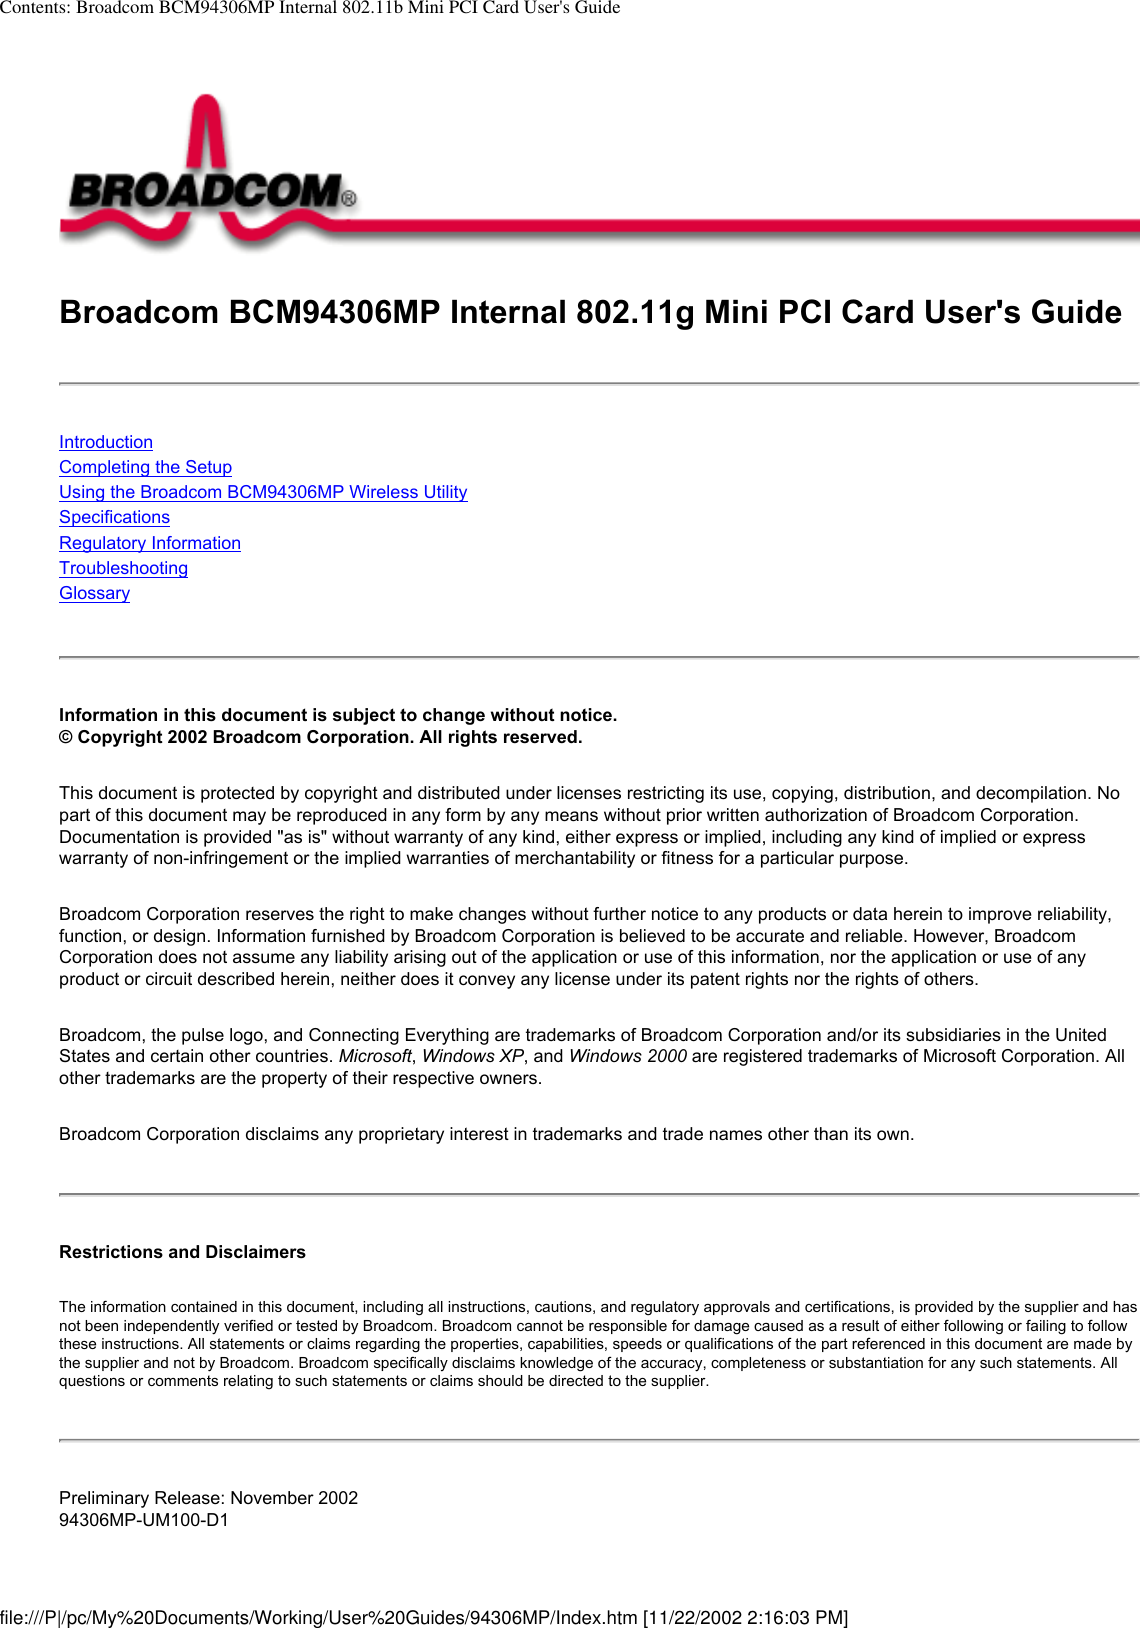 Contents: Broadcom BCM94306MP Internal 802.11b Mini PCI Card User&apos;s GuideBroadcom BCM94306MP Internal 802.11g Mini PCI Card User&apos;s GuideIntroductionCompleting the SetupUsing the Broadcom BCM94306MP Wireless UtilitySpecificationsRegulatory InformationTroubleshooting Glossary Information in this document is subject to change without notice.© Copyright 2002 Broadcom Corporation. All rights reserved. This document is protected by copyright and distributed under licenses restricting its use, copying, distribution, and decompilation. No part of this document may be reproduced in any form by any means without prior written authorization of Broadcom Corporation. Documentation is provided &quot;as is&quot; without warranty of any kind, either express or implied, including any kind of implied or express warranty of non-infringement or the implied warranties of merchantability or fitness for a particular purpose. Broadcom Corporation reserves the right to make changes without further notice to any products or data herein to improve reliability, function, or design. Information furnished by Broadcom Corporation is believed to be accurate and reliable. However, Broadcom Corporation does not assume any liability arising out of the application or use of this information, nor the application or use of any product or circuit described herein, neither does it convey any license under its patent rights nor the rights of others. Broadcom, the pulse logo, and Connecting Everything are trademarks of Broadcom Corporation and/or its subsidiaries in the United States and certain other countries. Microsoft, Windows XP, and Windows 2000 are registered trademarks of Microsoft Corporation. All other trademarks are the property of their respective owners. Broadcom Corporation disclaims any proprietary interest in trademarks and trade names other than its own. Restrictions and Disclaimers The information contained in this document, including all instructions, cautions, and regulatory approvals and certifications, is provided by the supplier and has not been independently verified or tested by Broadcom. Broadcom cannot be responsible for damage caused as a result of either following or failing to follow these instructions. All statements or claims regarding the properties, capabilities, speeds or qualifications of the part referenced in this document are made by the supplier and not by Broadcom. Broadcom specifically disclaims knowledge of the accuracy, completeness or substantiation for any such statements. All questions or comments relating to such statements or claims should be directed to the supplier. Preliminary Release: November 200294306MP-UM100-D1file:///P|/pc/My%20Documents/Working/User%20Guides/94306MP/Index.htm [11/22/2002 2:16:03 PM]